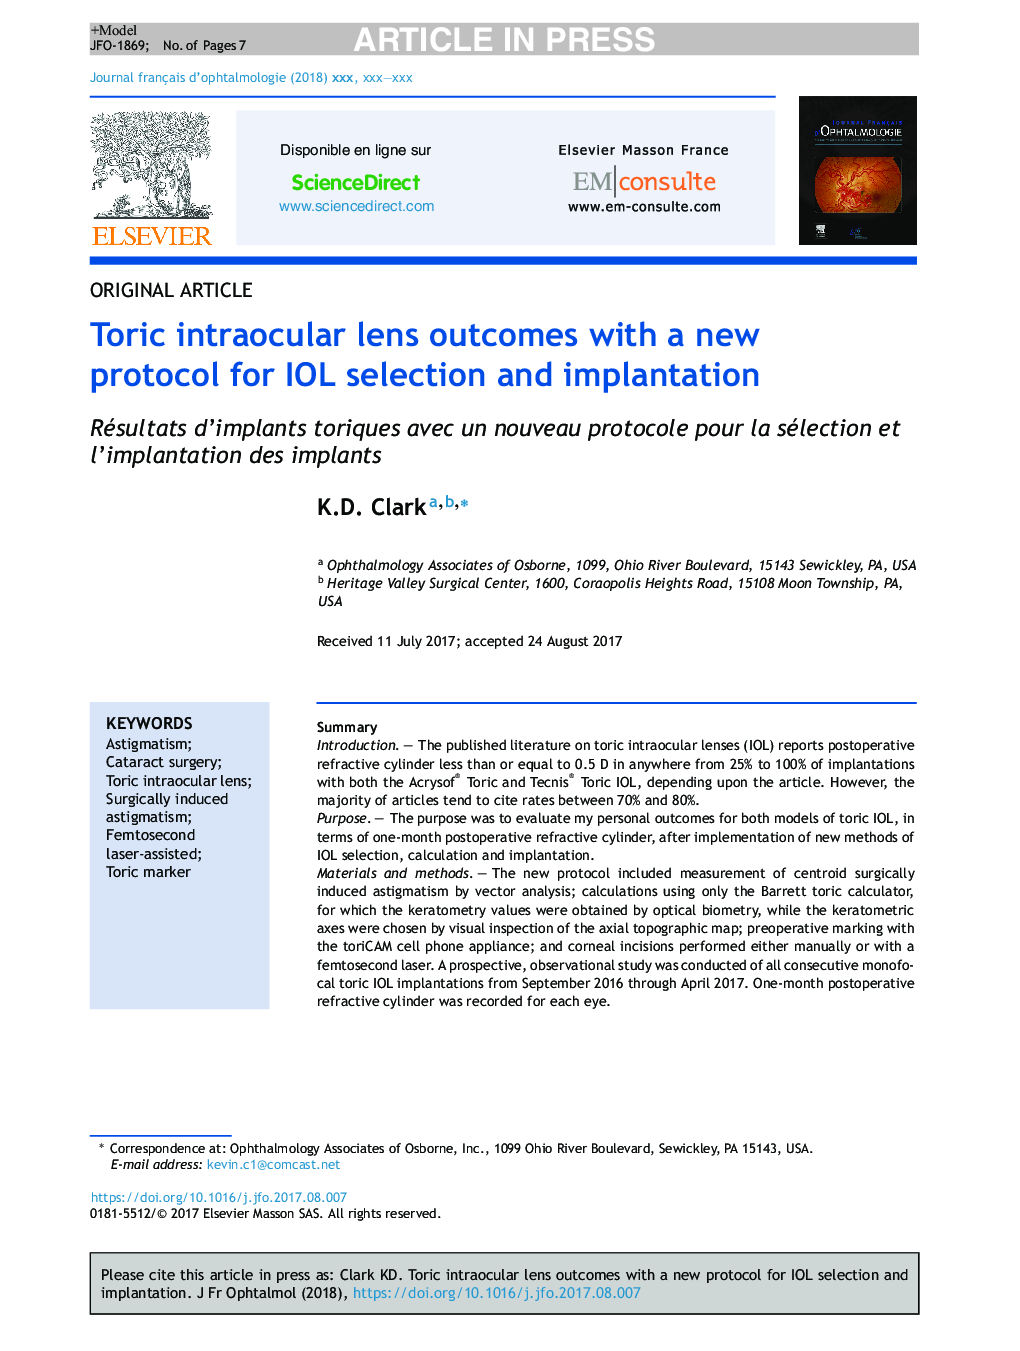 Toric intraocular lens outcomes with a new protocol for IOL selection and implantation